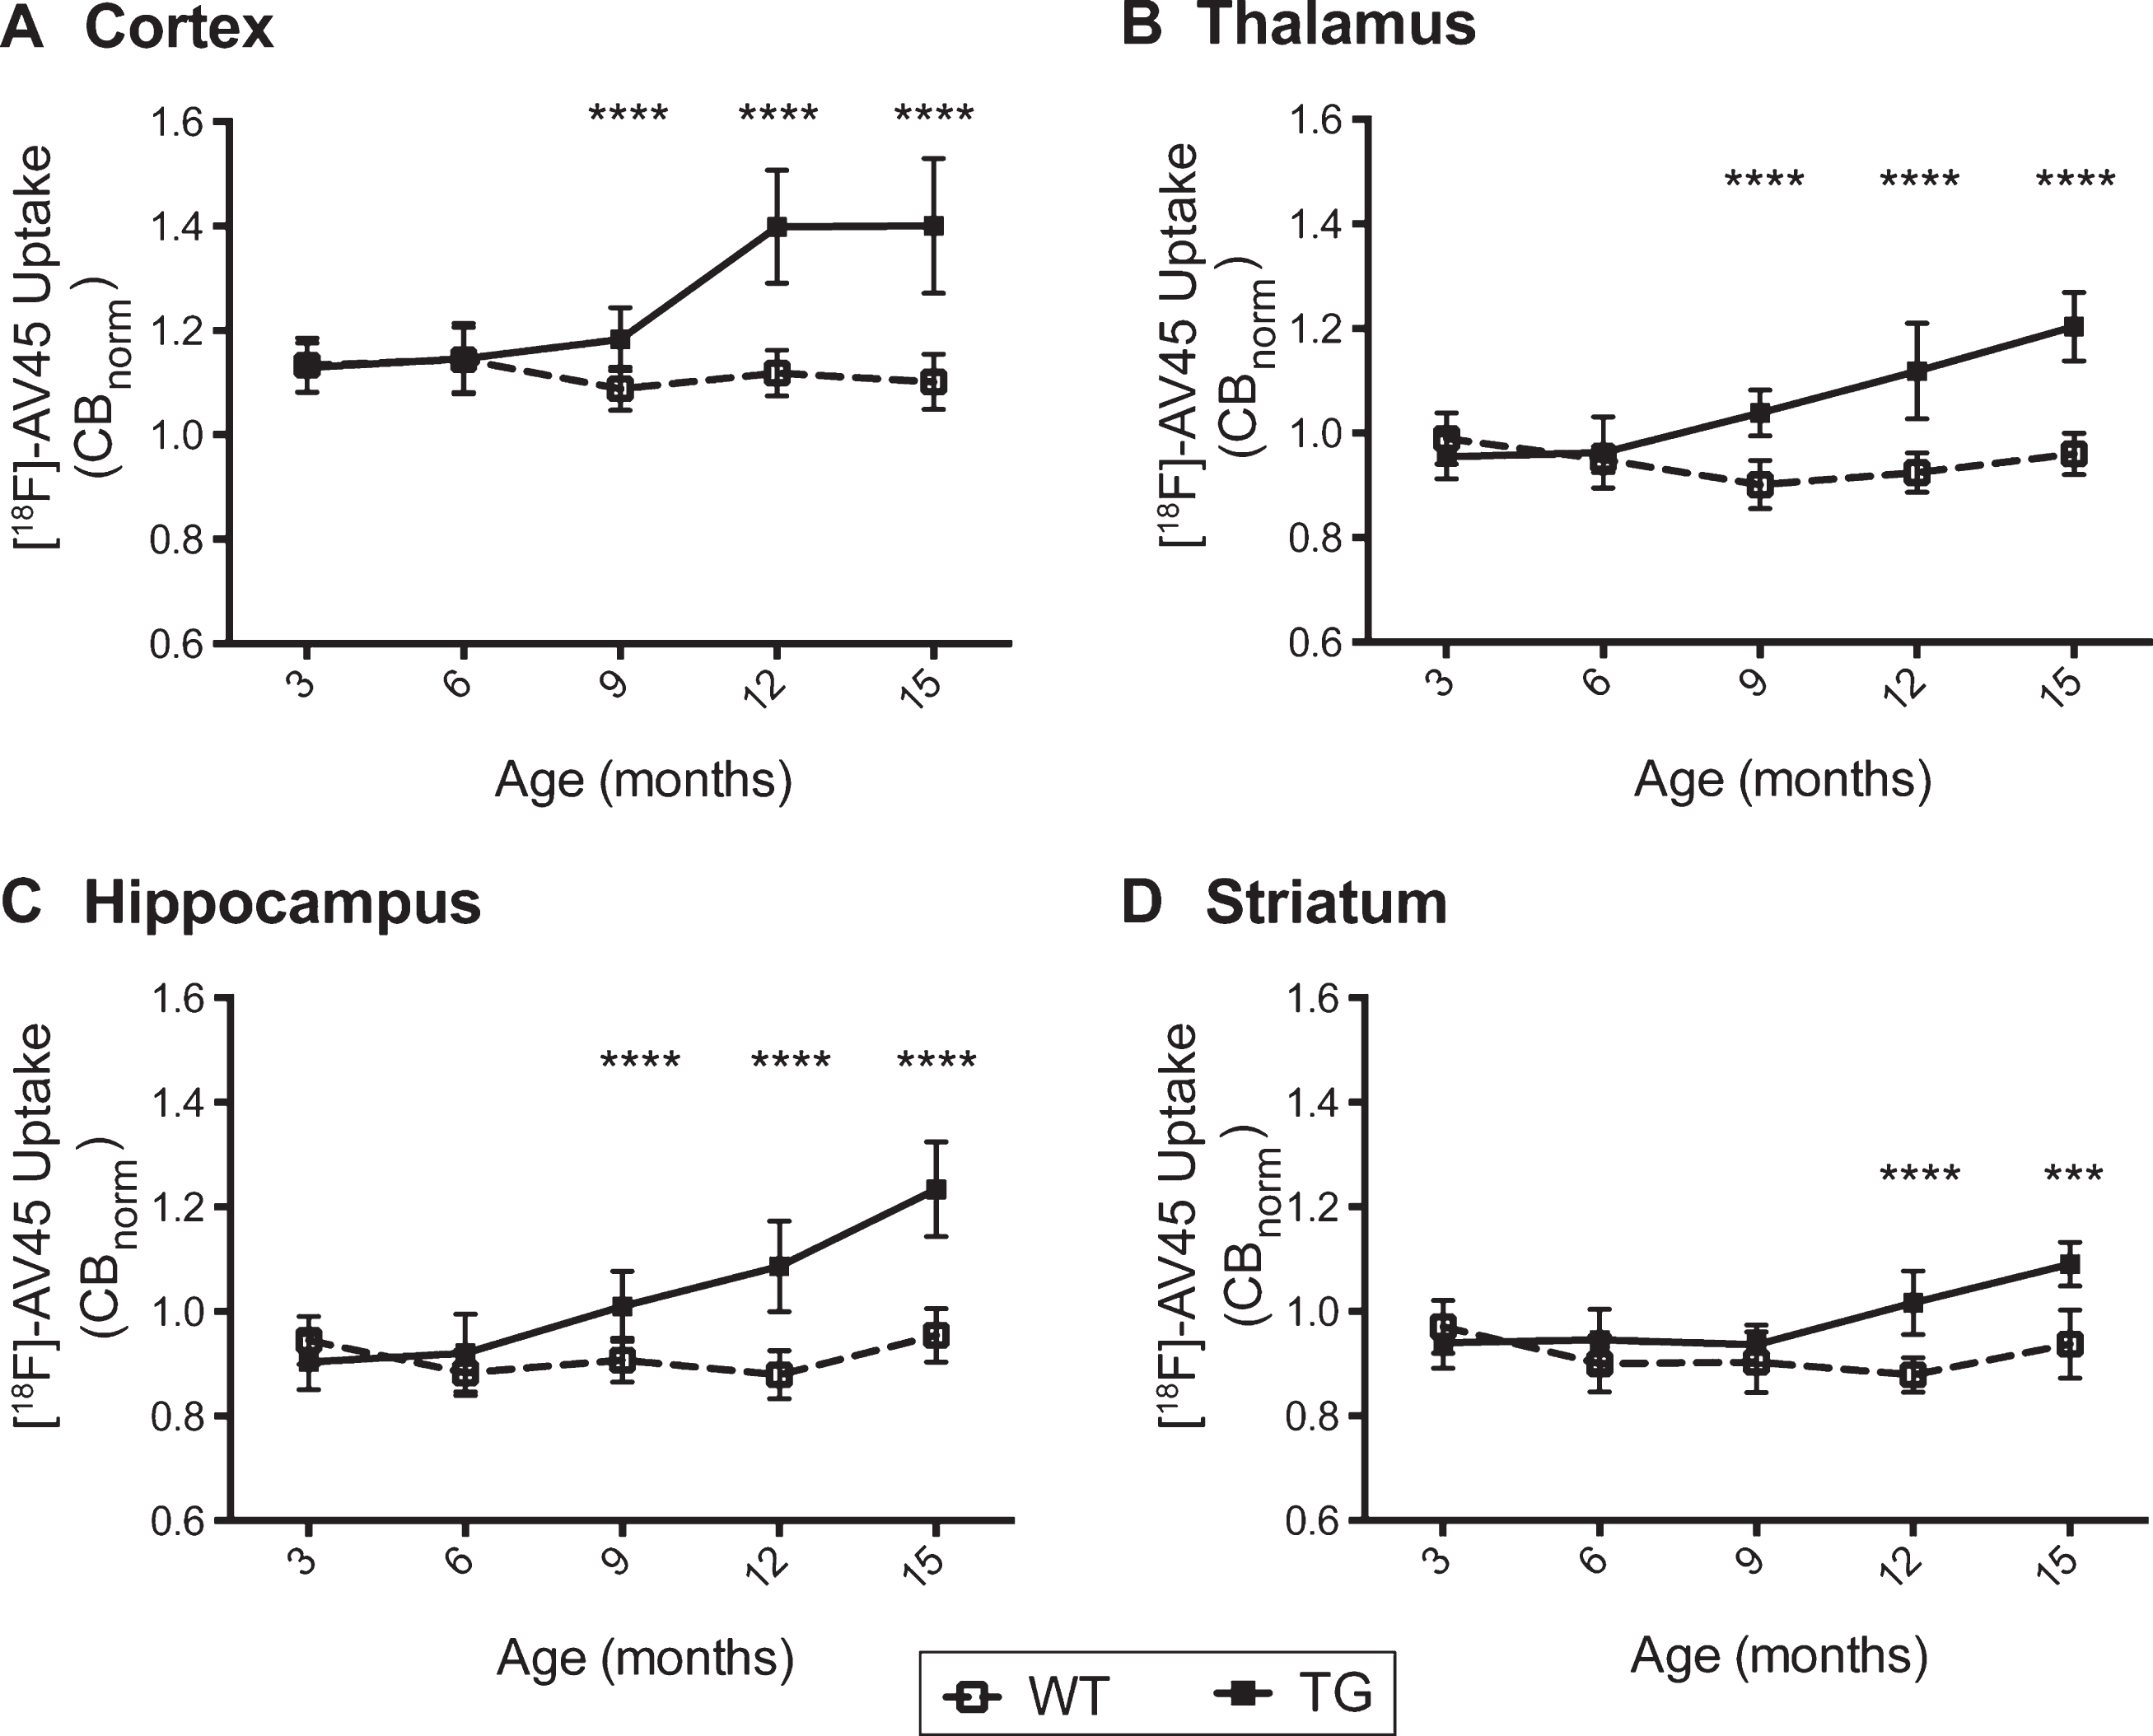 TASTPM mice demonstrate age-related increases in [18F]-AV45 uptake. Figures A-D show regional uptake values of [18F]-AV45 in both genotypes over time. [18F]-AV45 uptake in each region was presented as a ratio to the cerebellum (CBnorm). Data is shown as mean±standard deviation. Differences between genotypes at each time point were evaluated with t-tests (with Sidak-Bonferroni correction), ****p < 0.0001, ***p < 0.001.